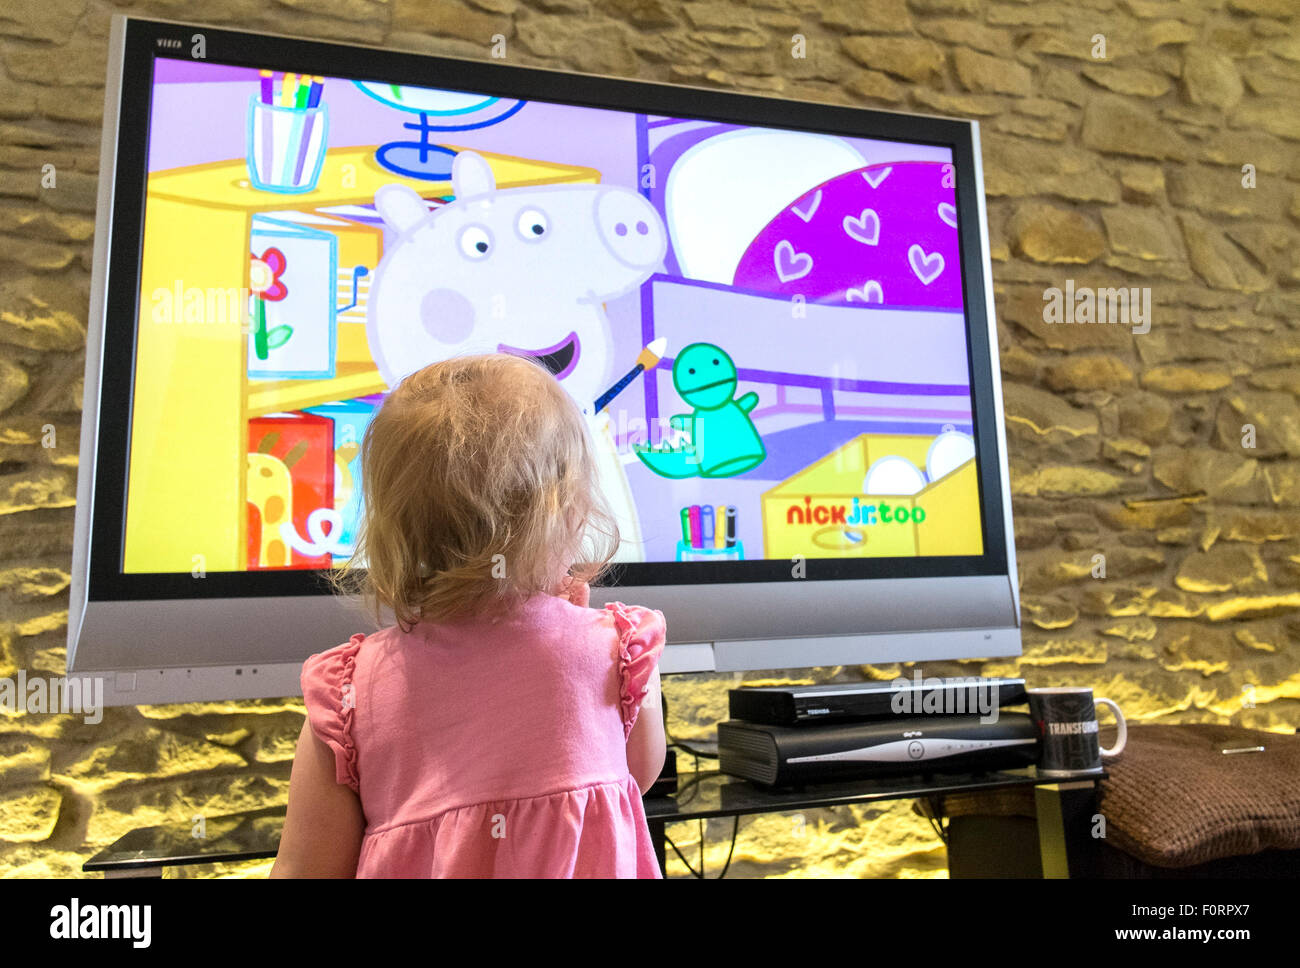 A toddler watches childrens television. Stock Photo